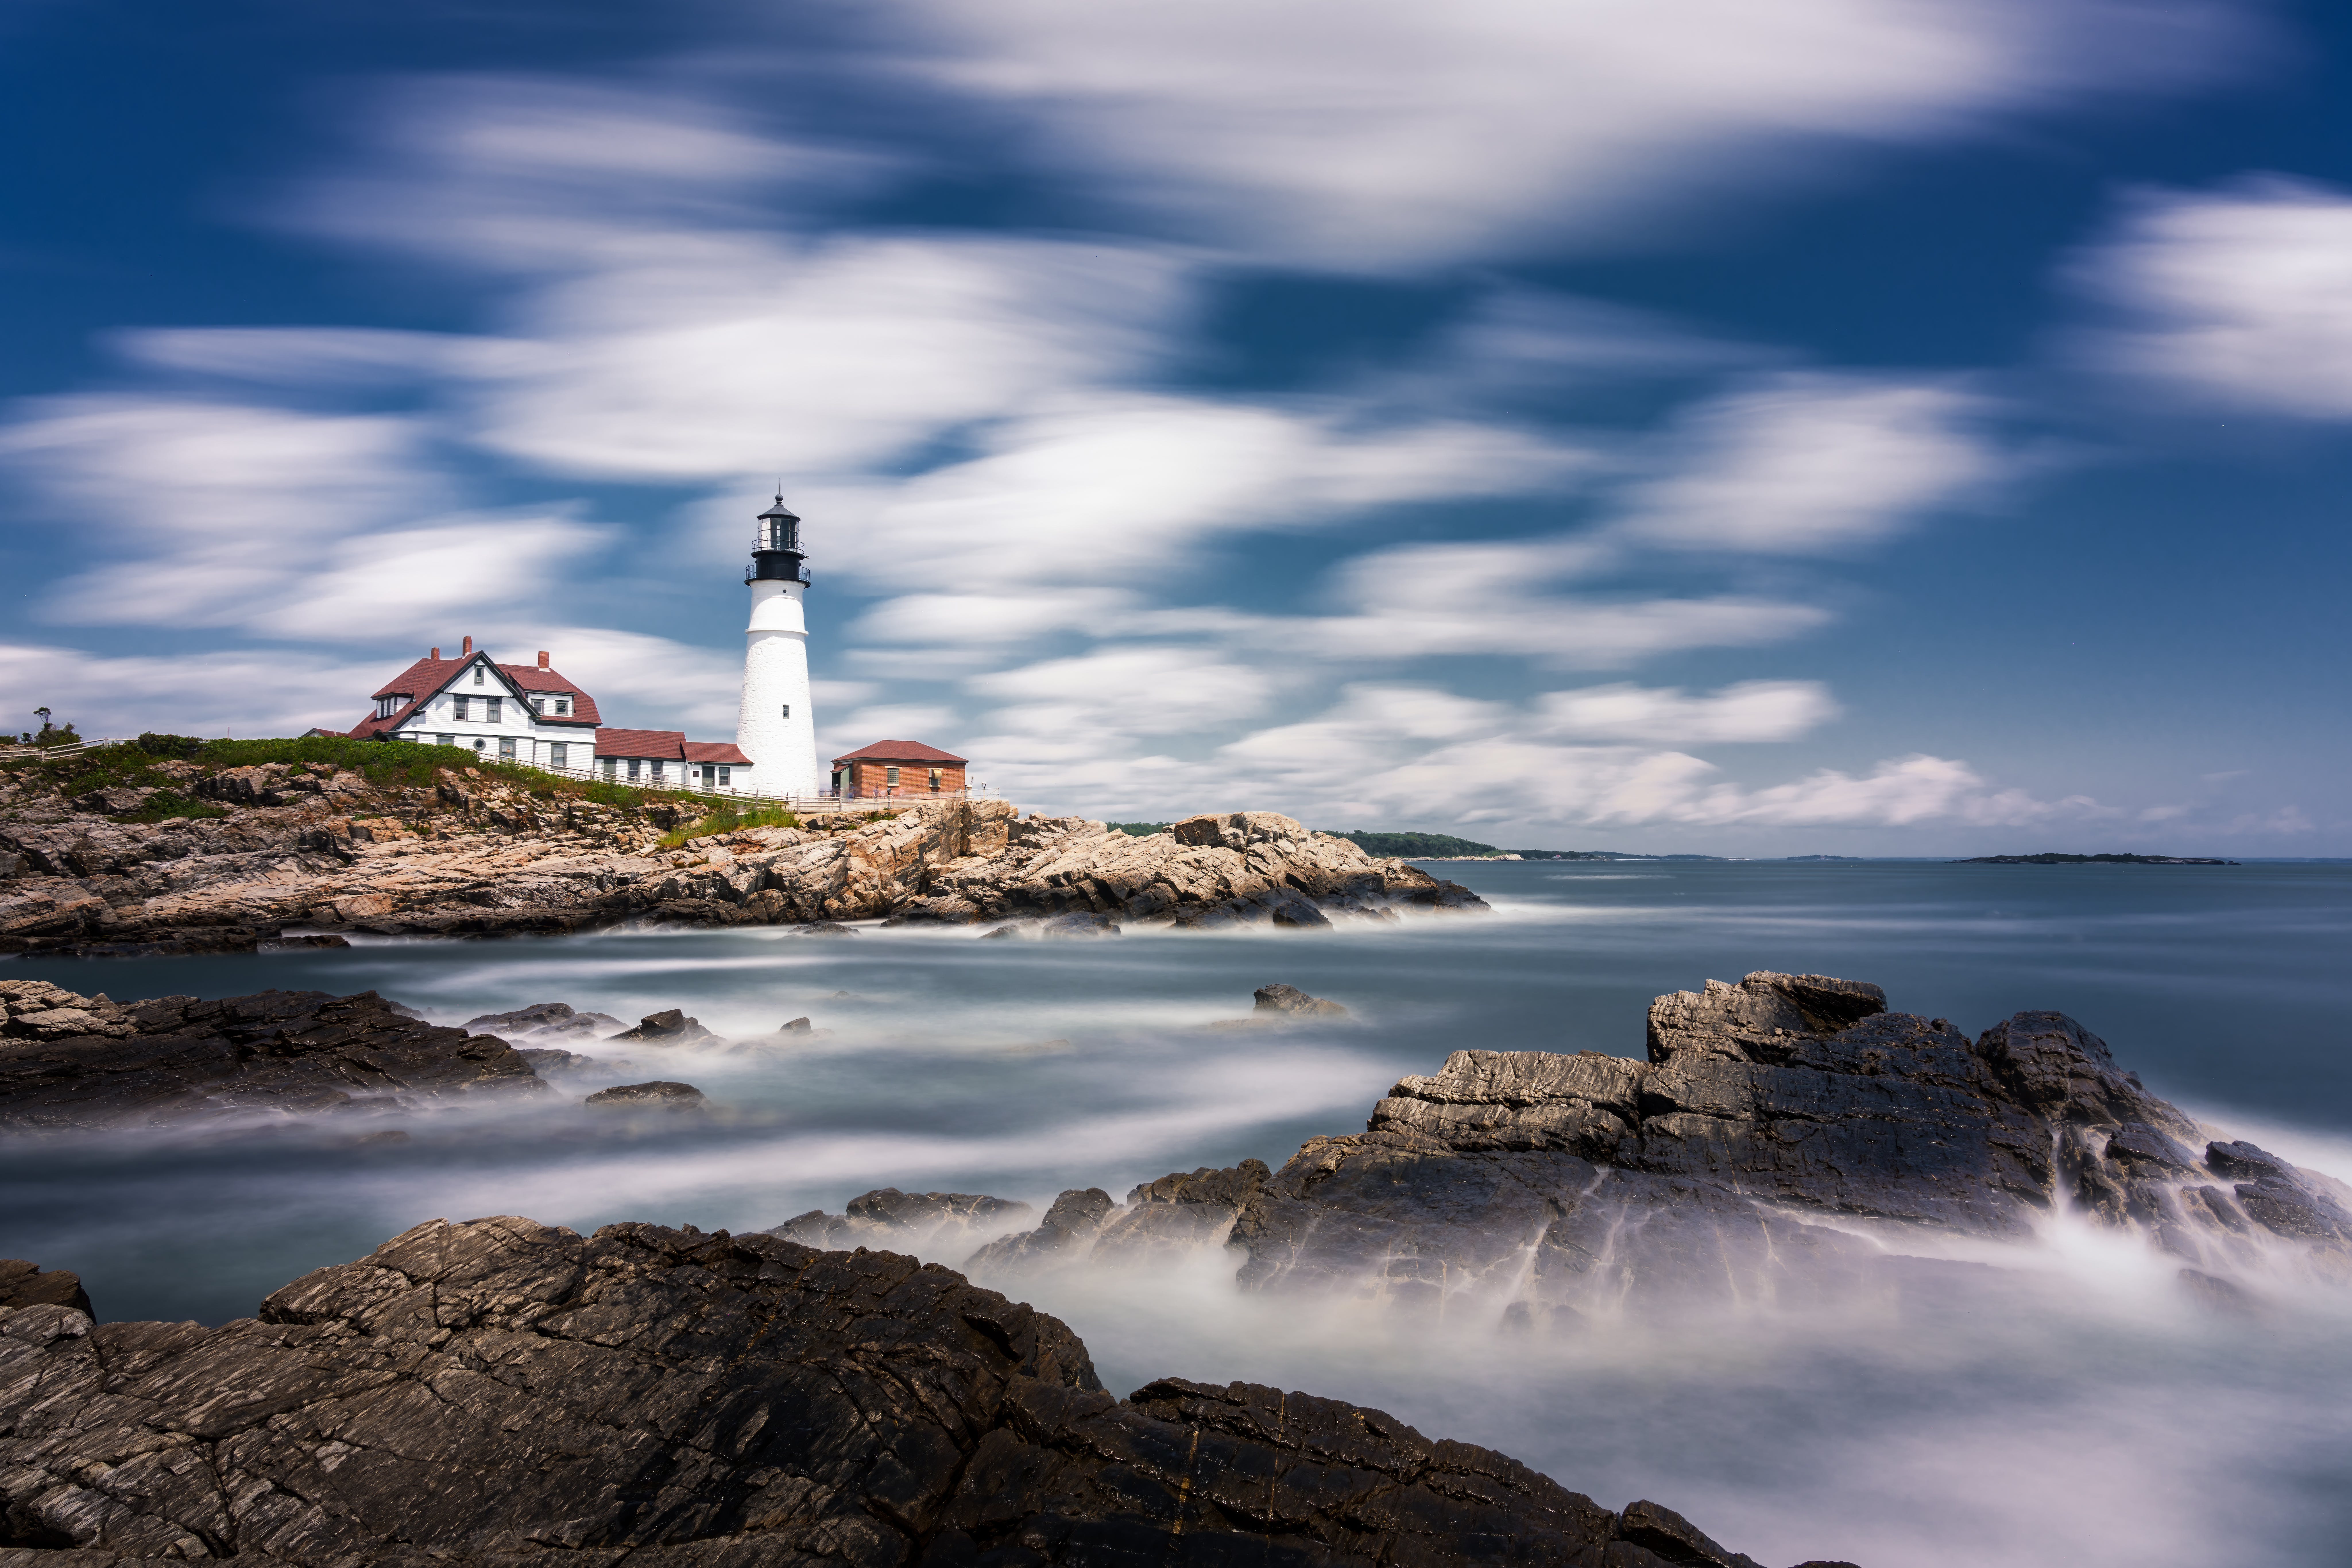 There are many exiting things to do in the many states of New England.
pictured: a New England coast with a light house and surrounding house on a cloudy day 